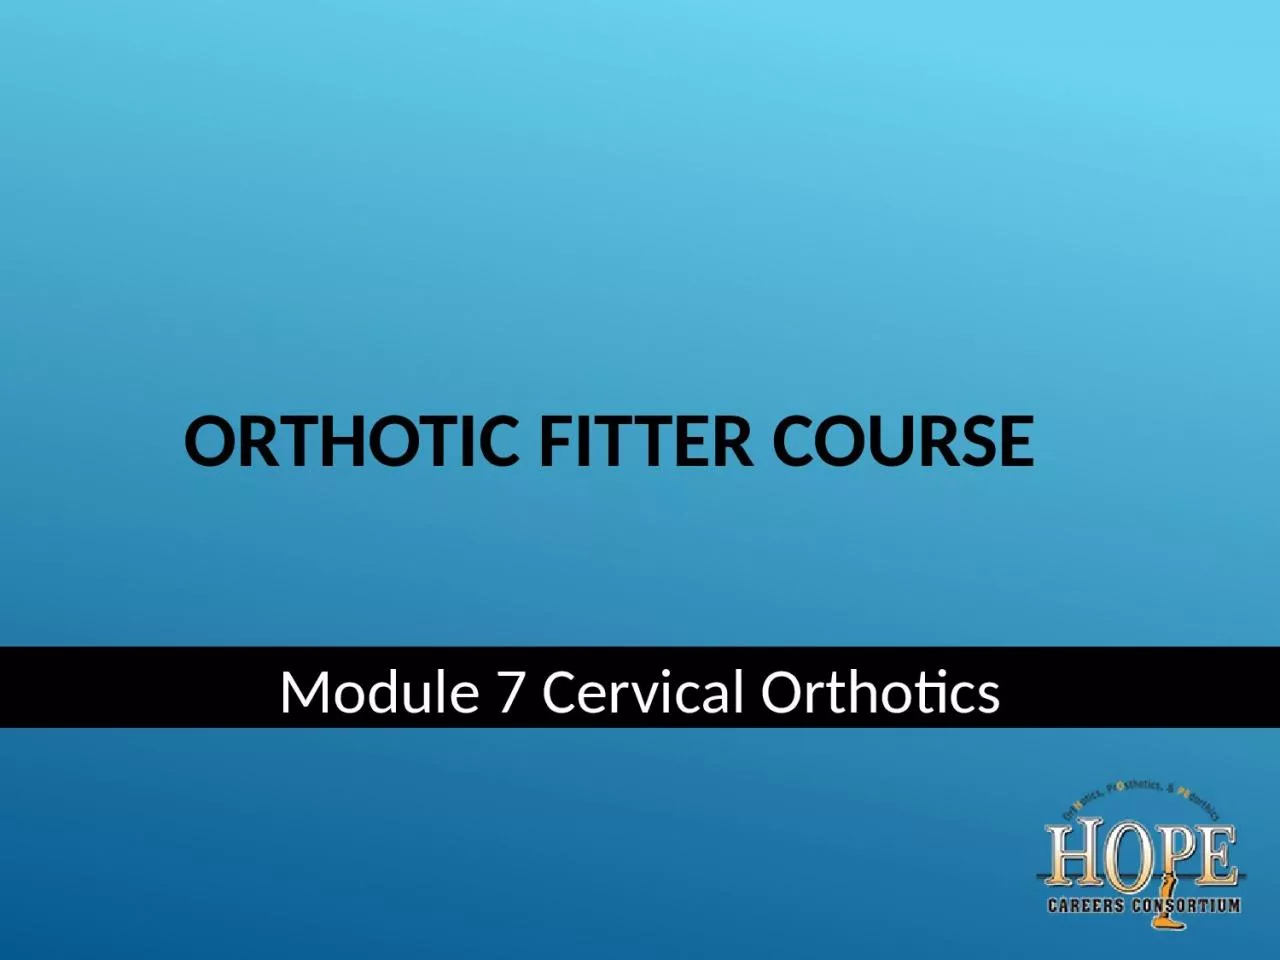 Orthotic Fitter Course Module 7 Cervical Orthotics